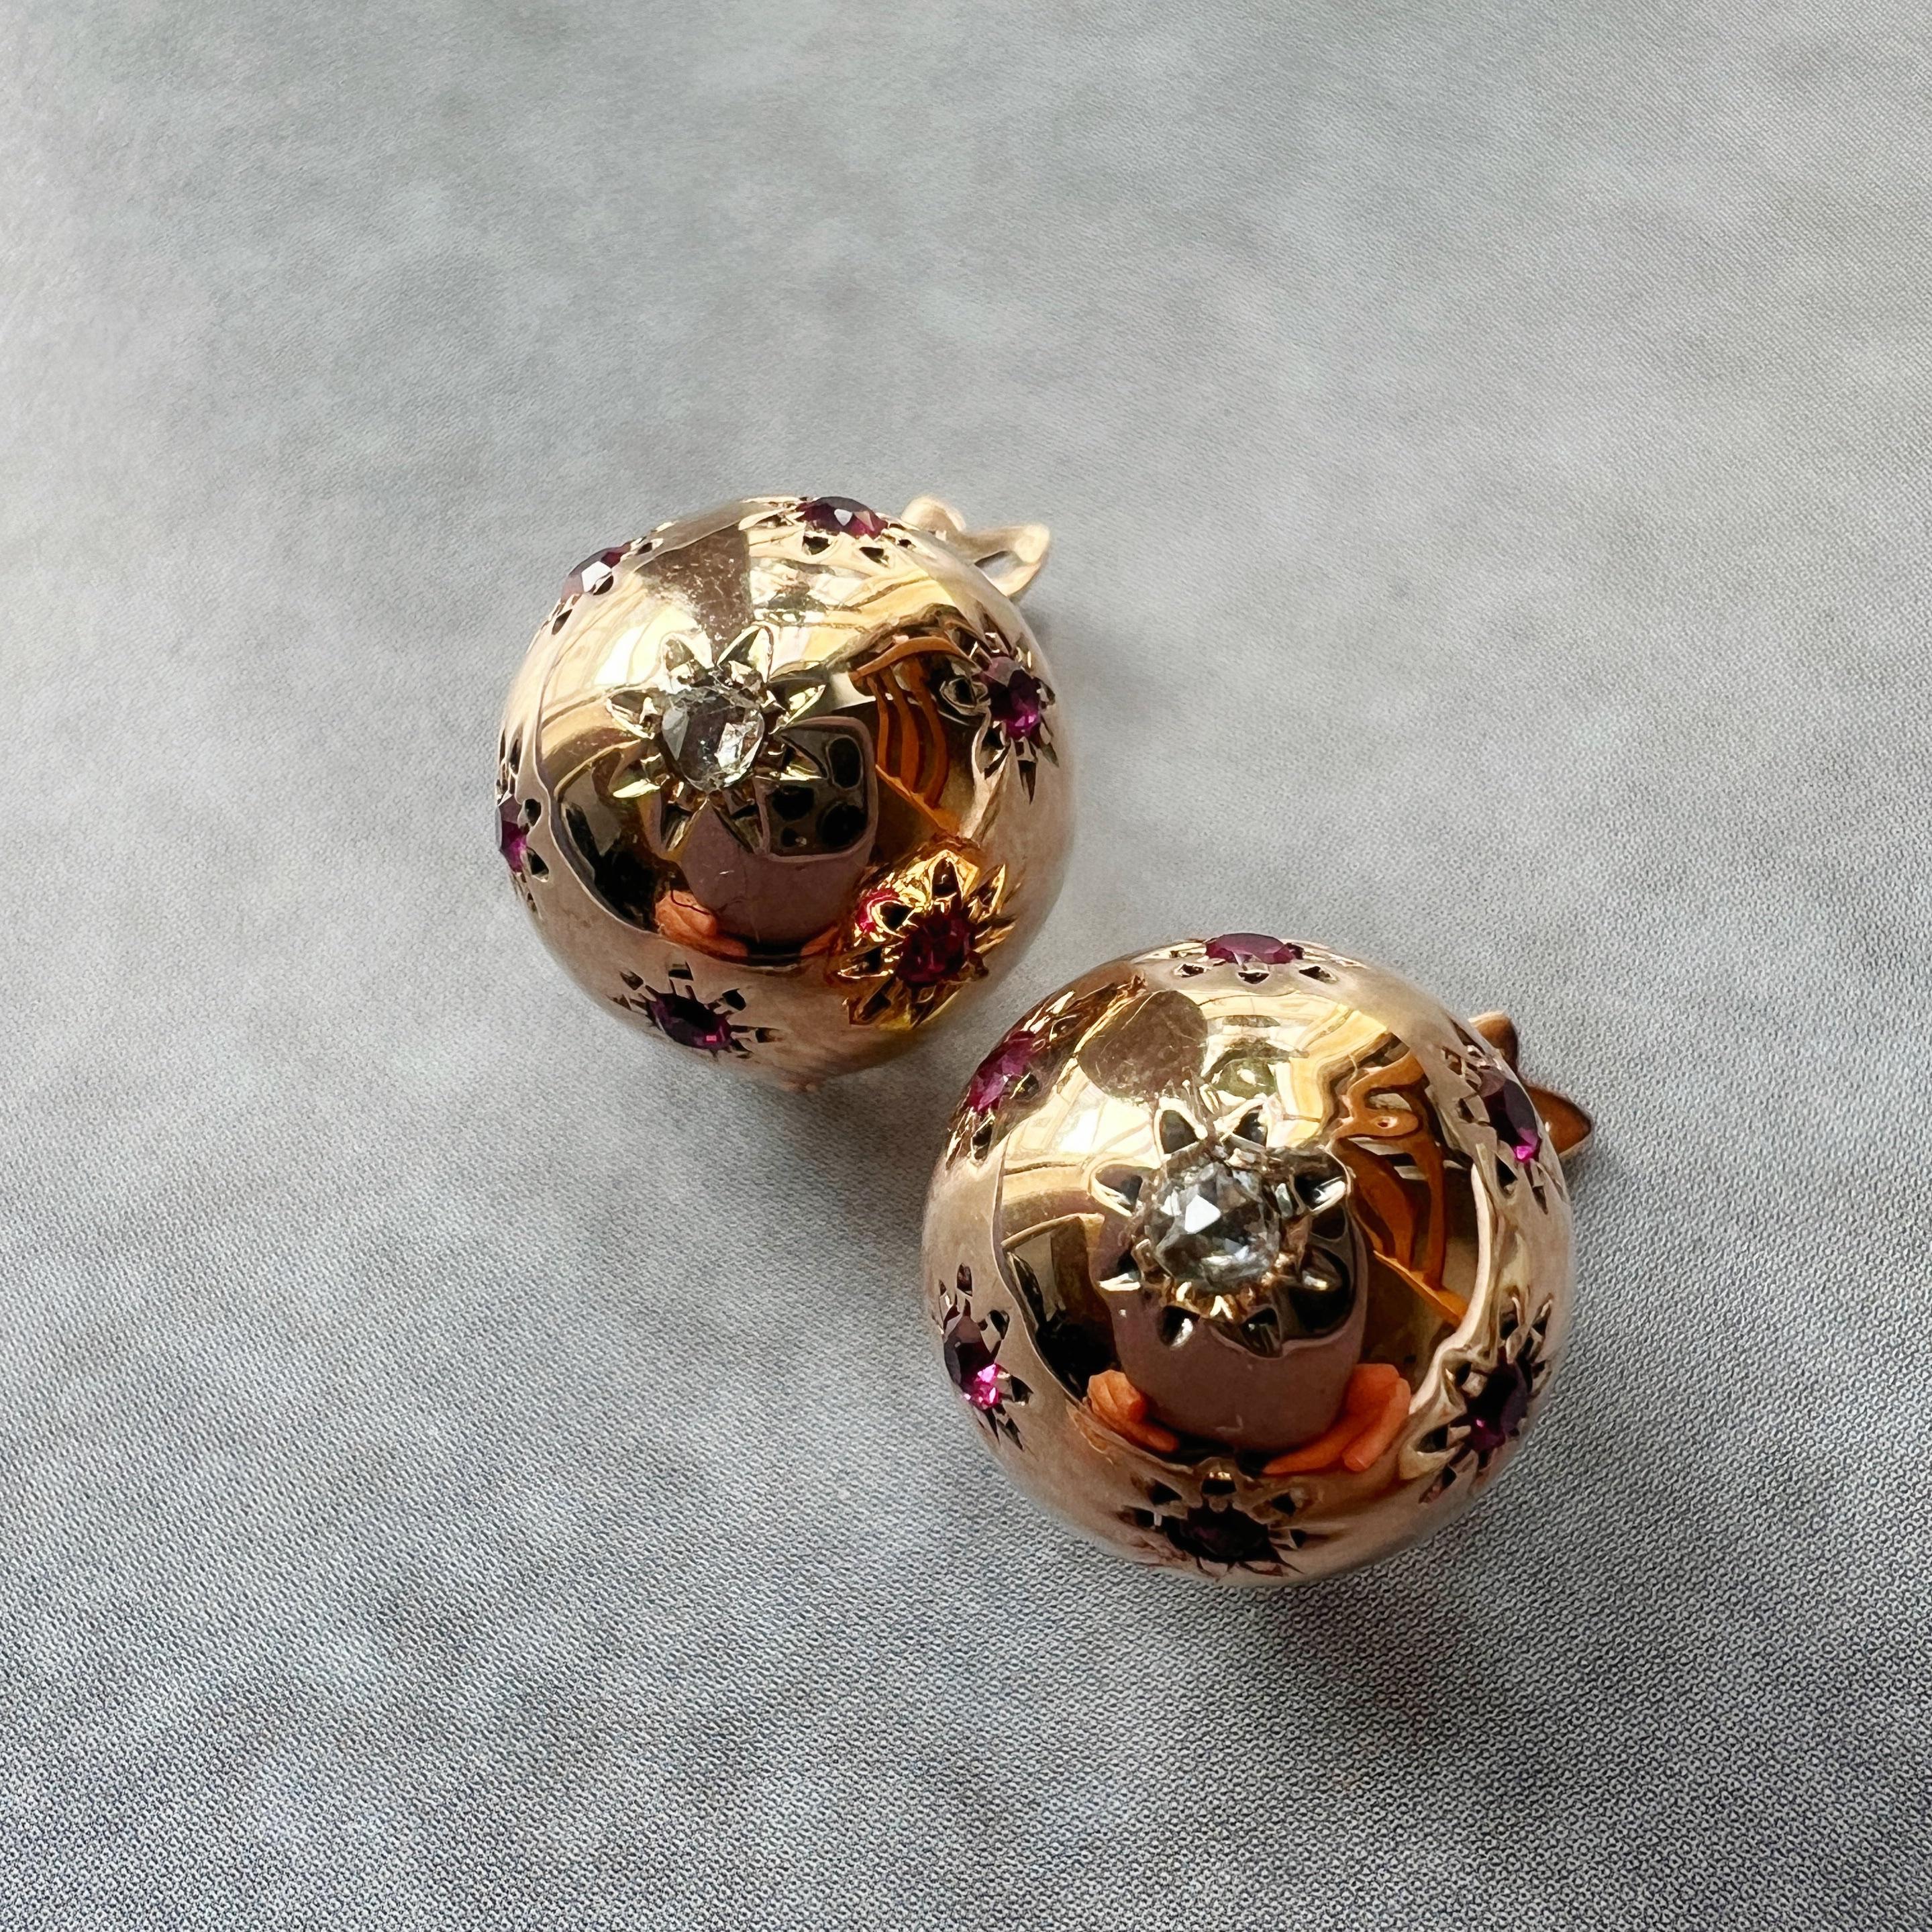 For sale a beautiful pair of 18K gold French retro dome Earrings, a fusion of vintage elegance and celestial allure.

The earrings feature 7 dazzling stars on each side, crafted with diamonds and red rubies. The diamonds, in the coveted rose cut